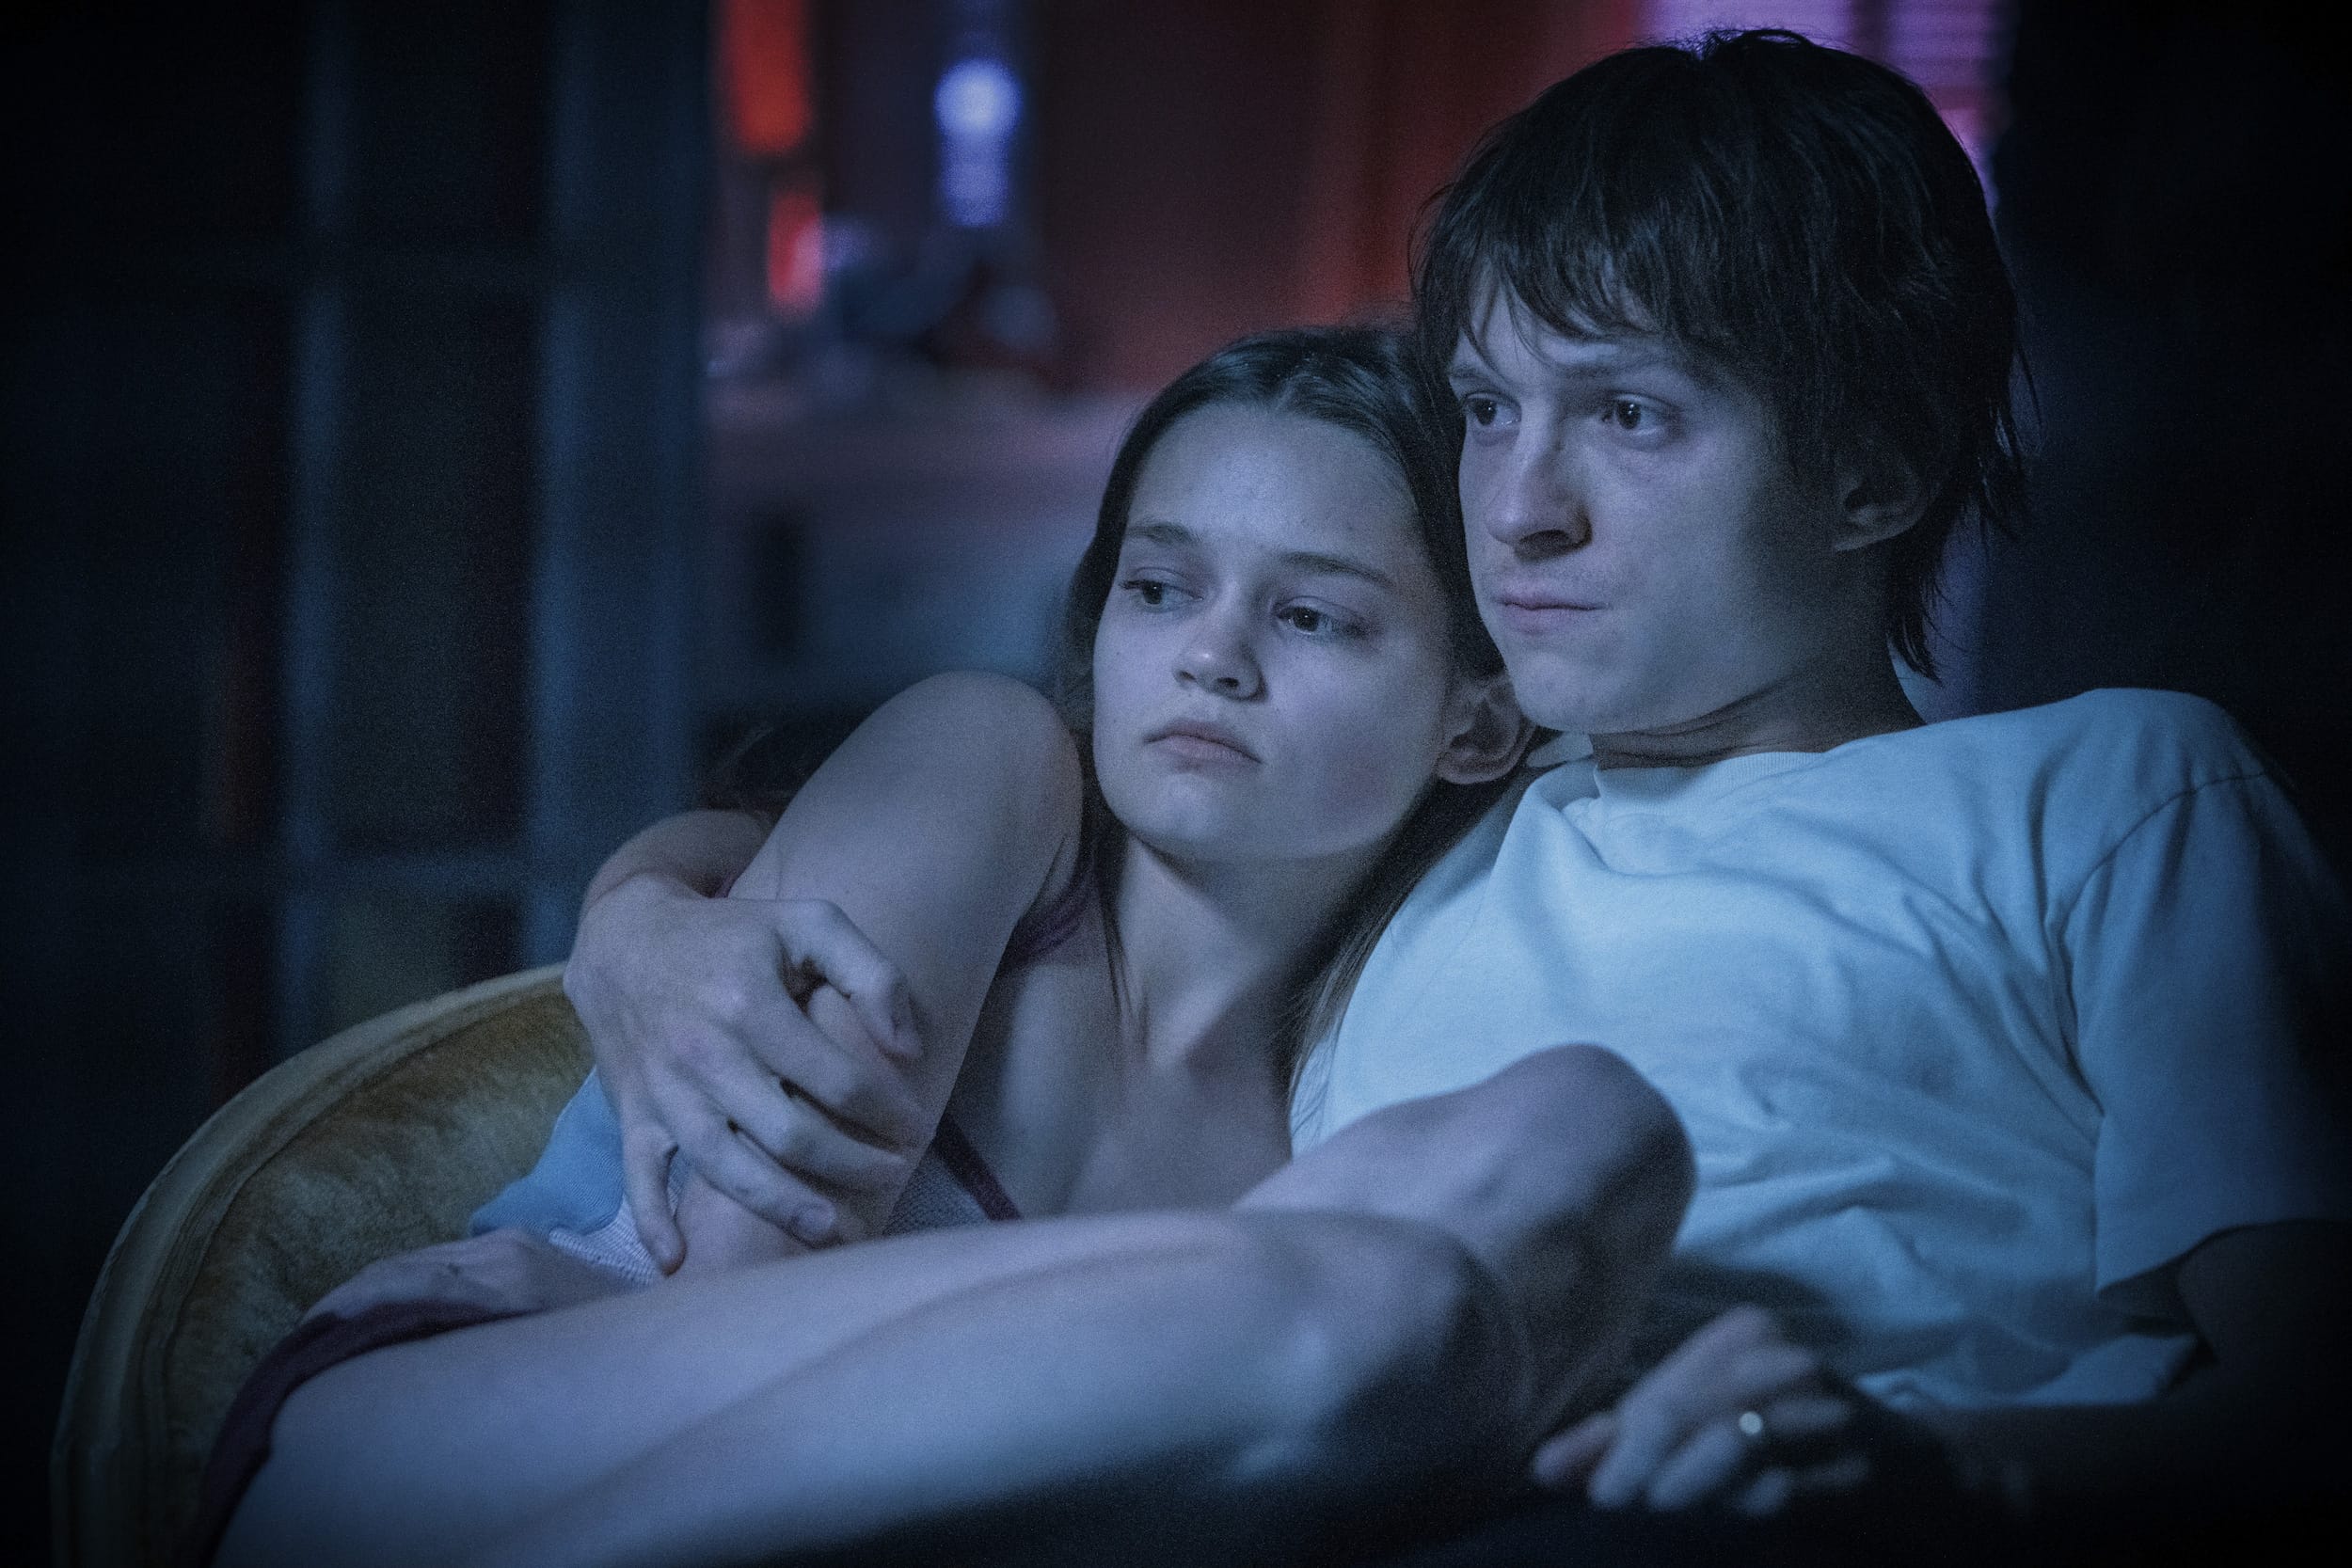 Ciara Bravo and Tom Holland go unbelievably dark in "Cherry." Emphasis on the "unbelievable."